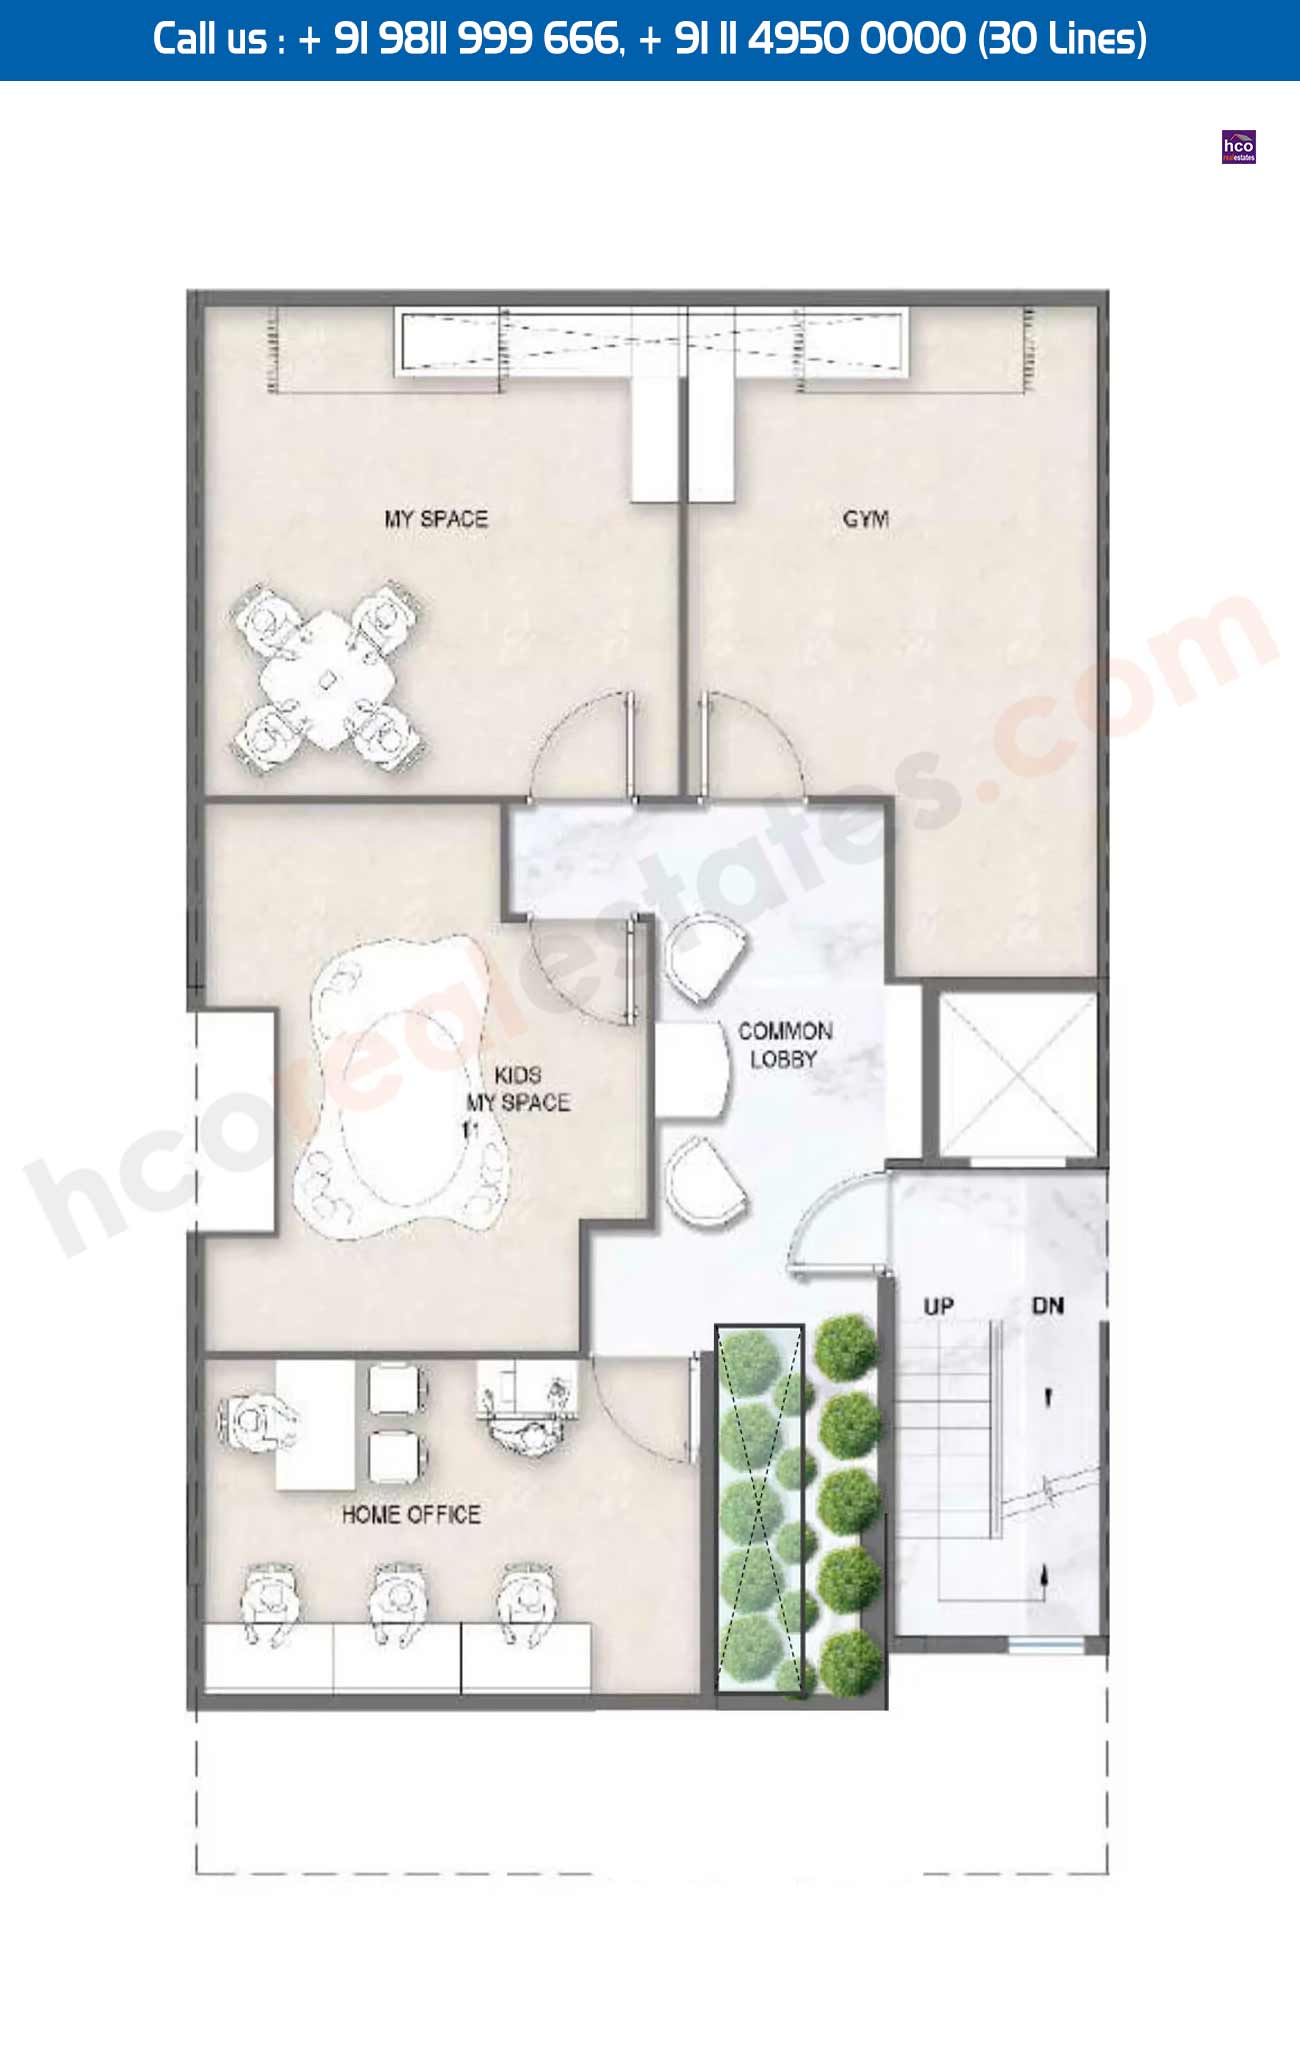 3 BHK + 3T, My Space: 1423 Sq. Ft.